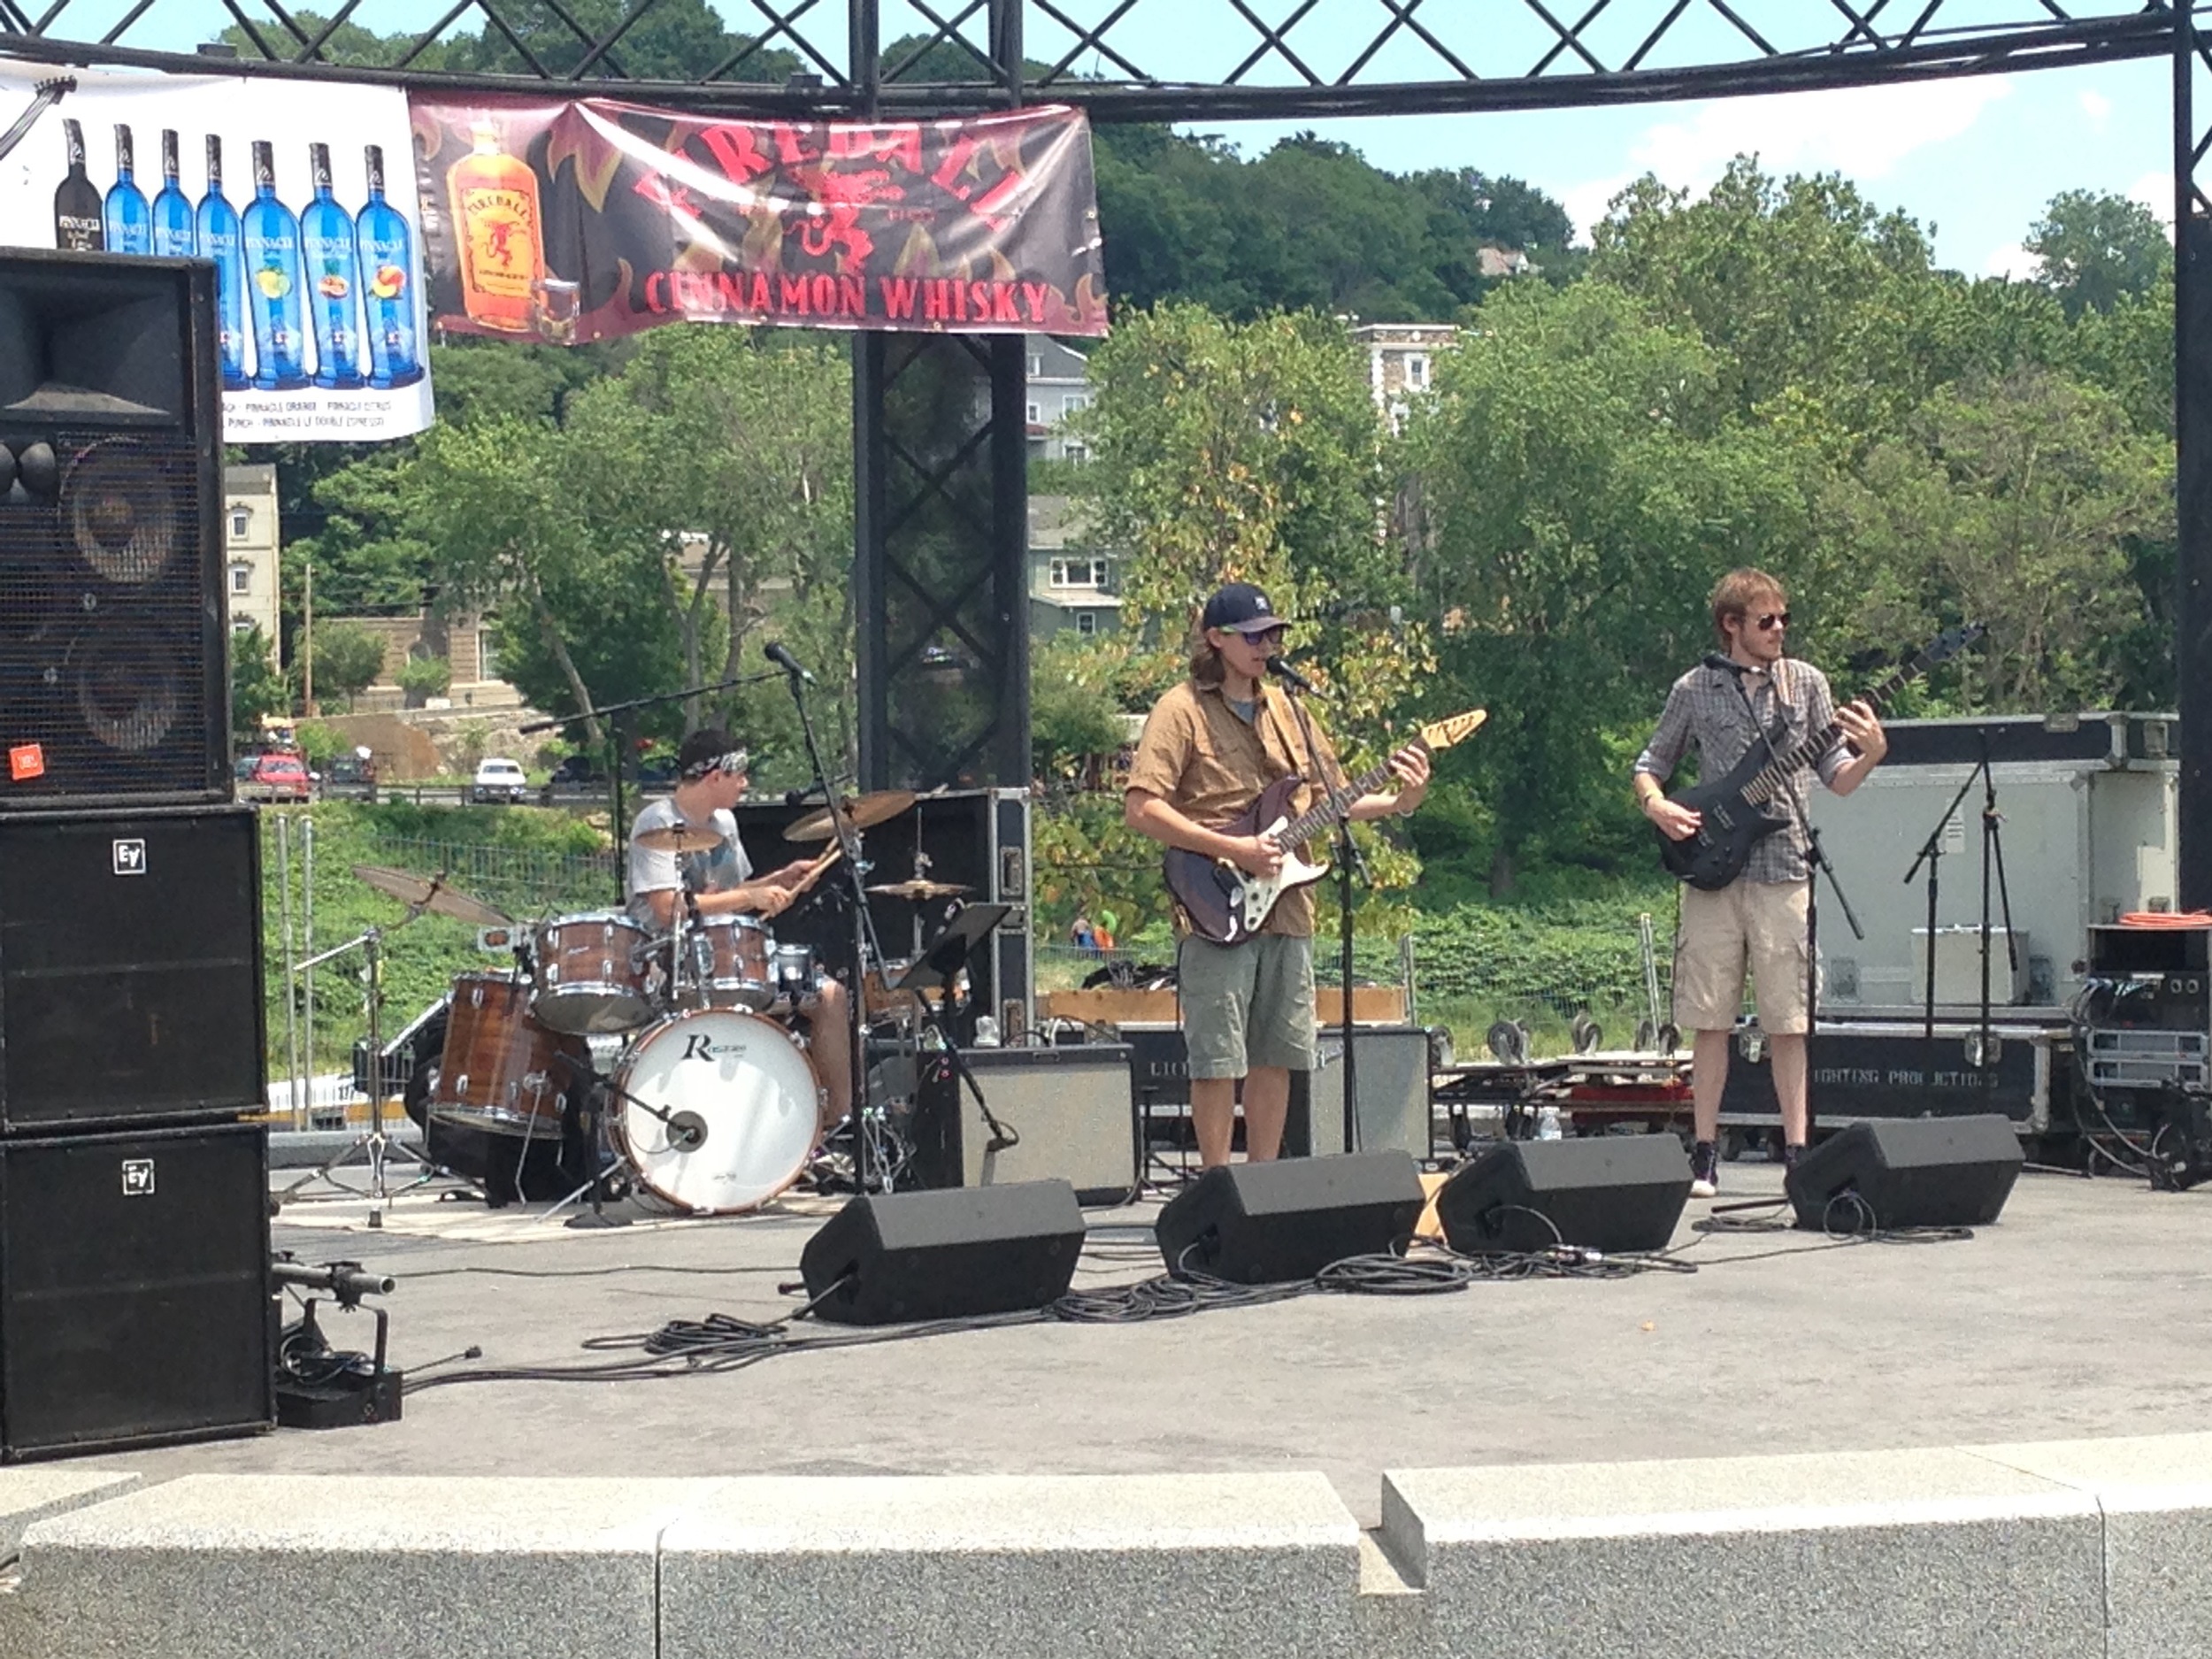  The Mosey Beet performs at Easton River Jam  (Dustin Schoof Photo)  